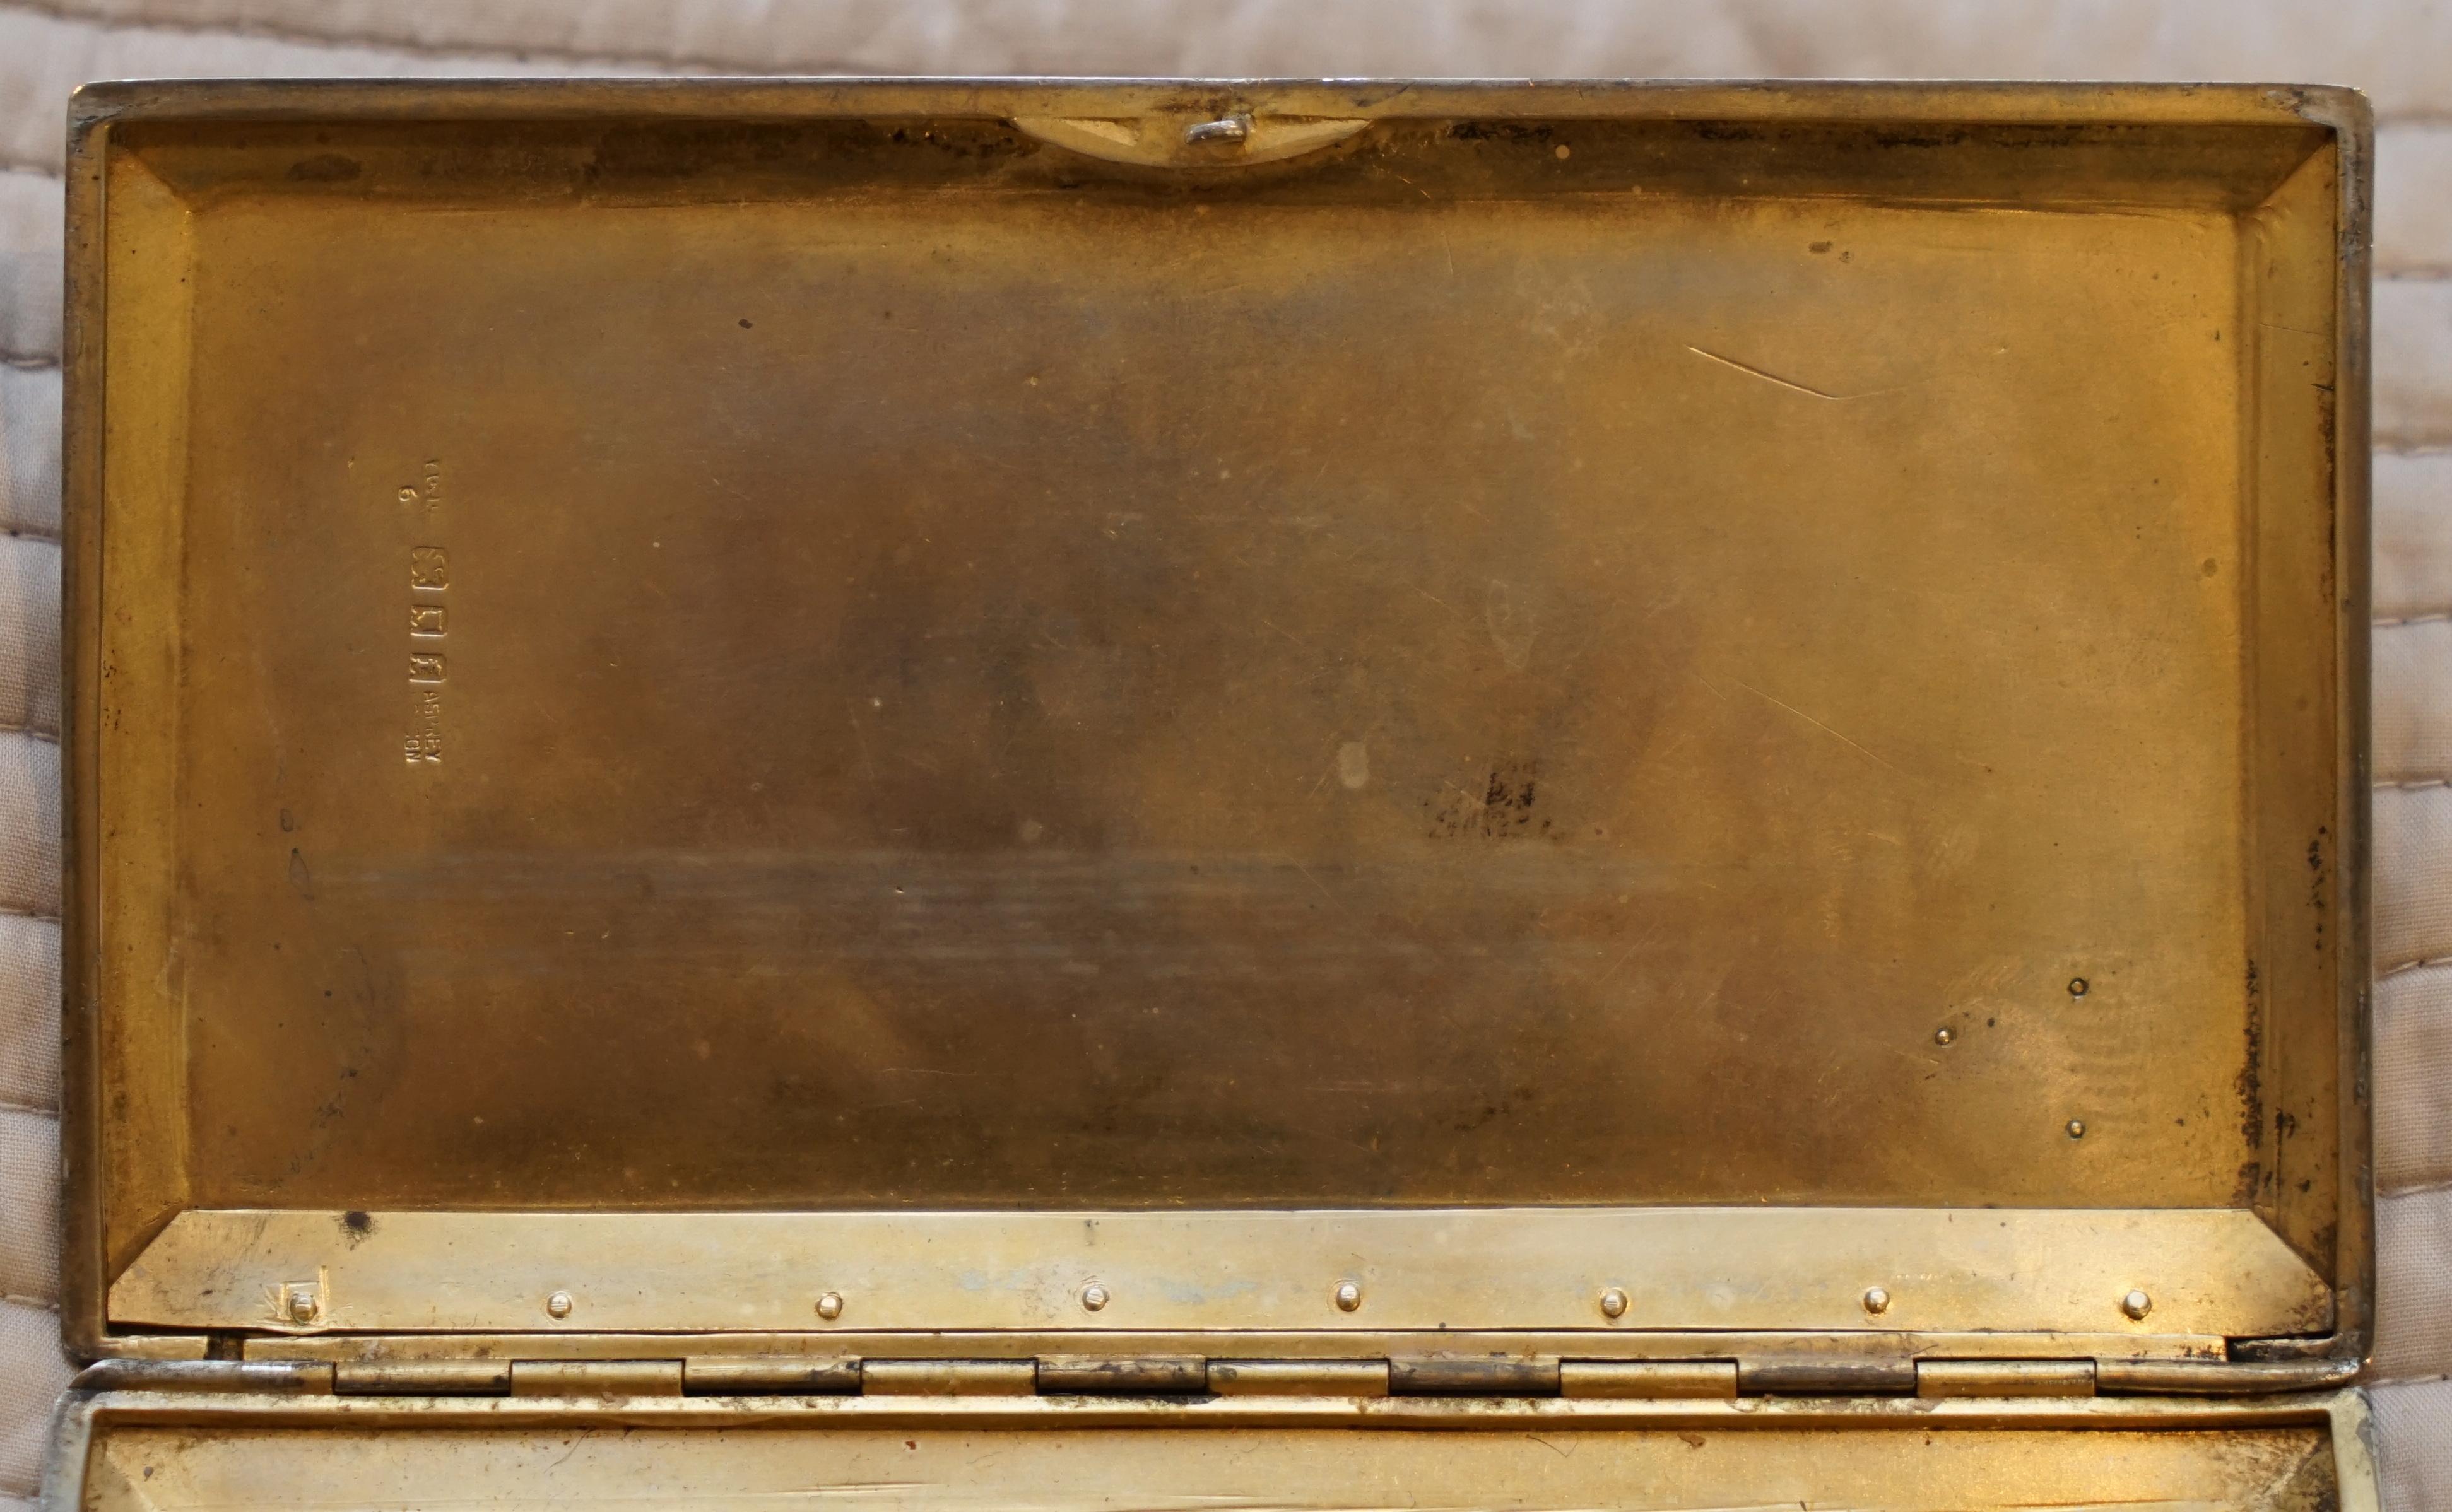 20th Century Solid Sterling Silver and Gold Gilt Asprey 1921 Cigarette Case with Belgium Flag